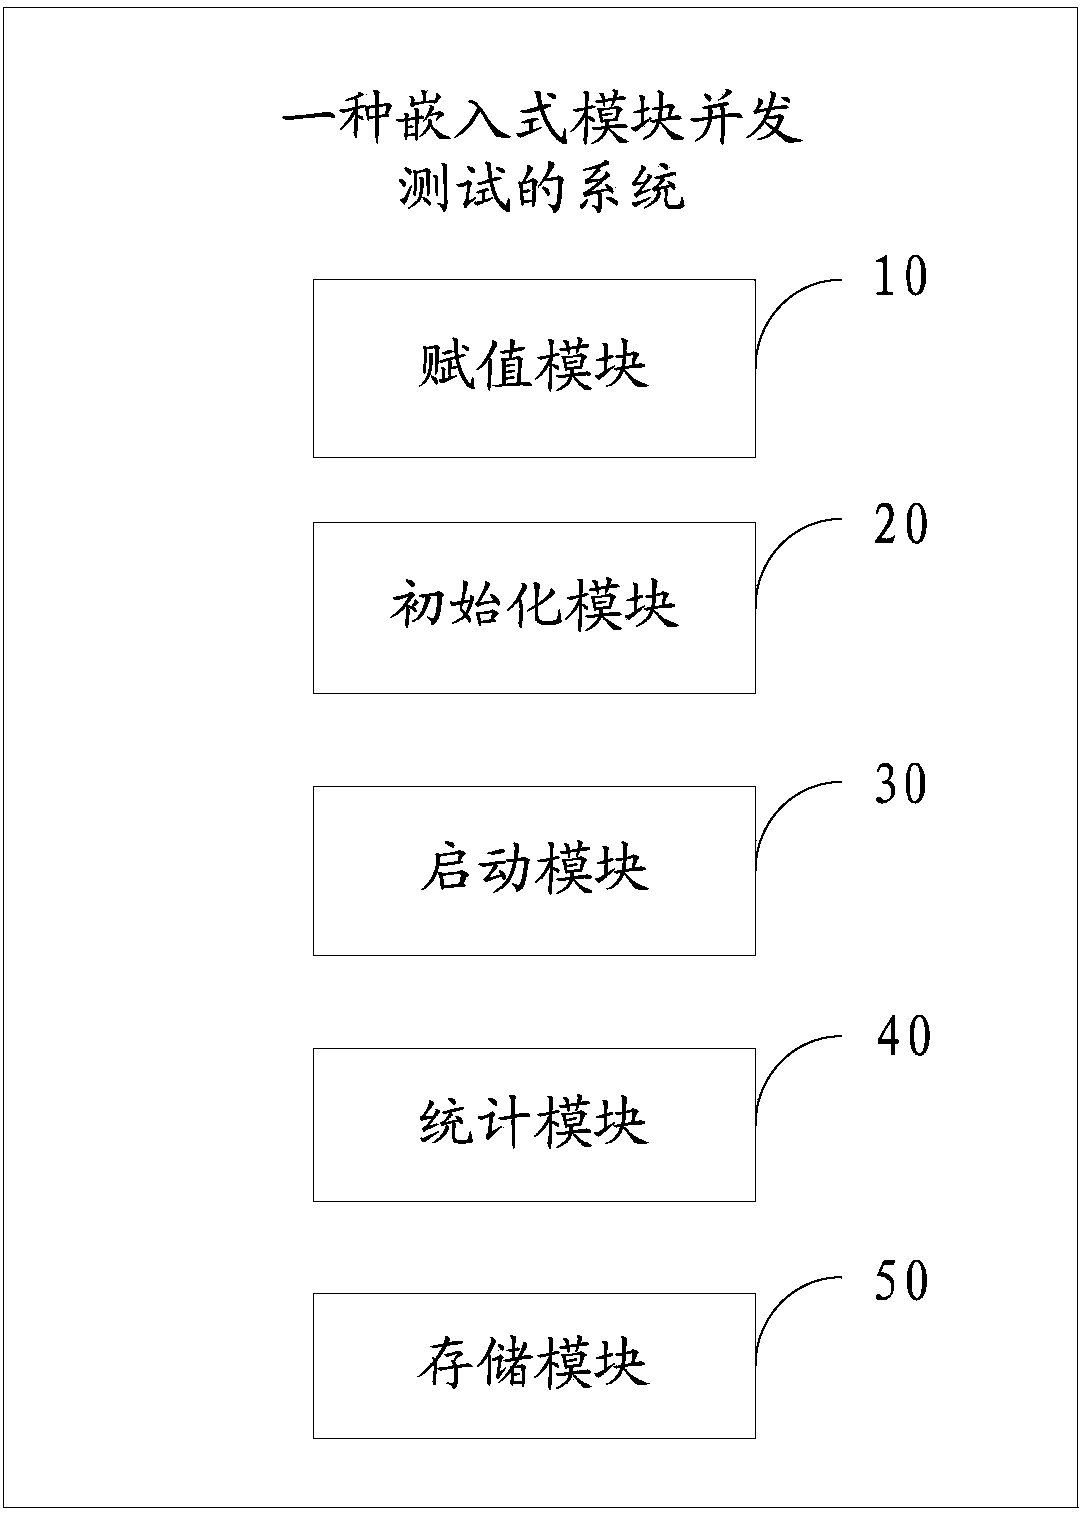 Method and system for concurrent testing of embedded module